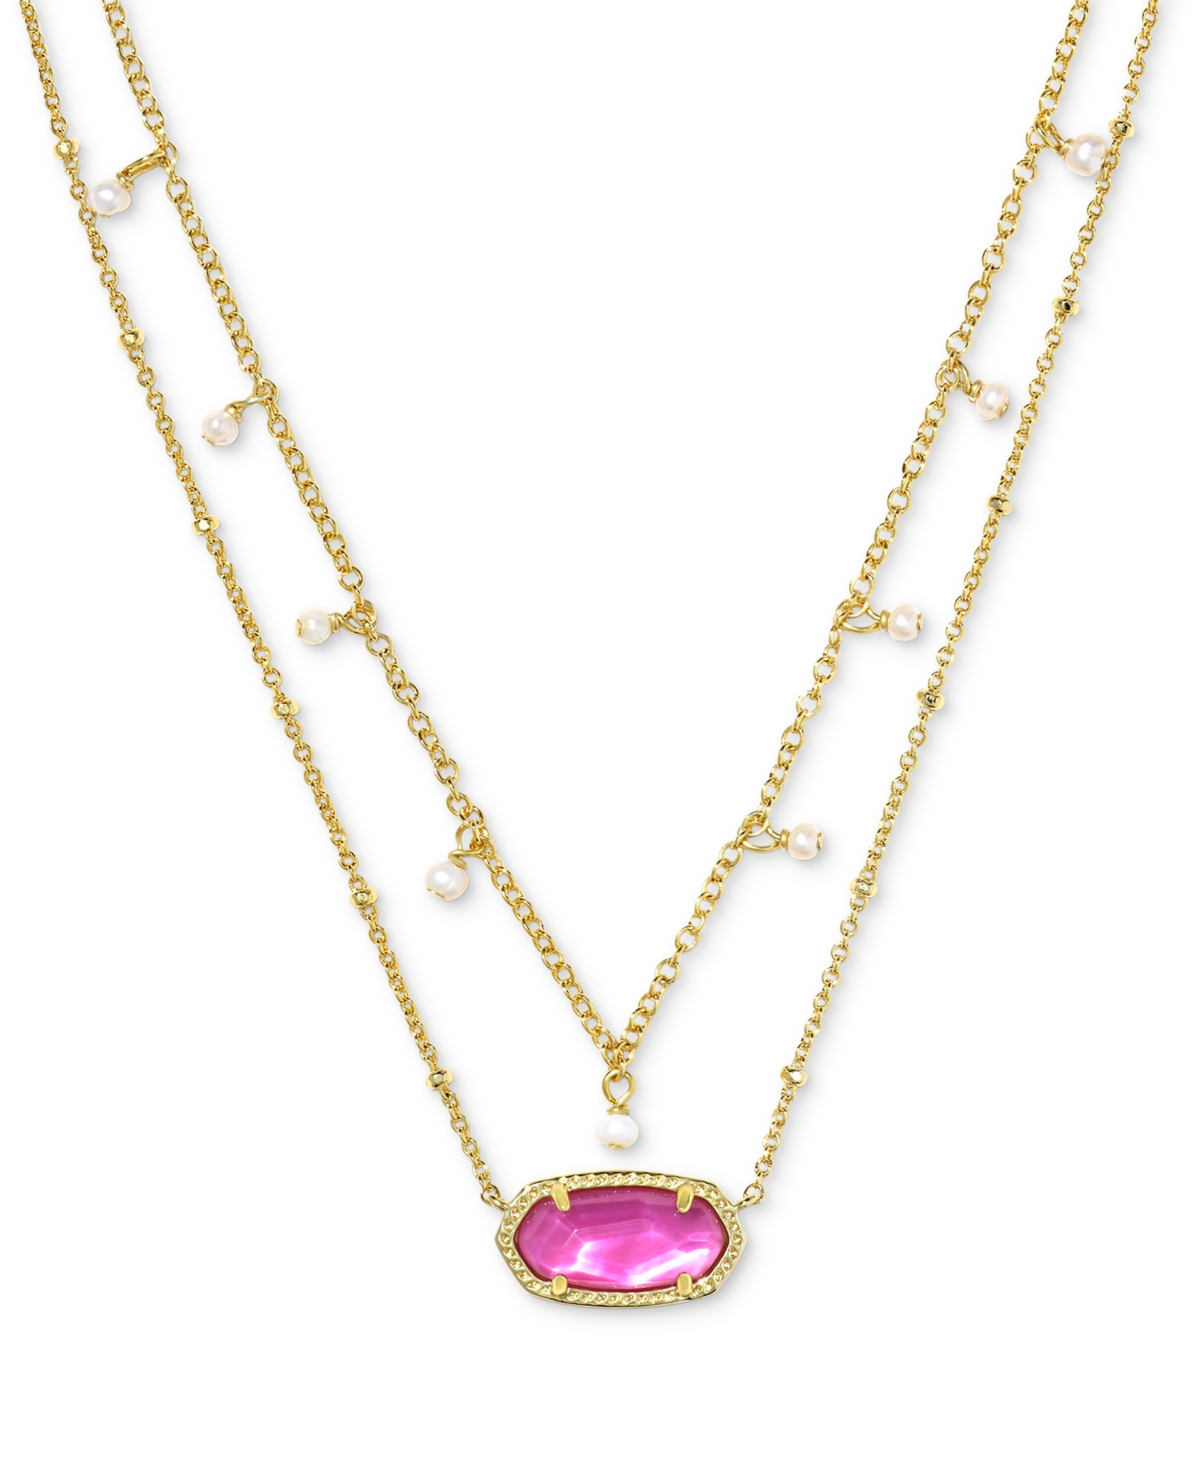 14k Gold-Plated Imitation Pearl & Stone 19" Adjustable Layered Pendant Necklace - Elisa Pearl Multi Strand Necklace